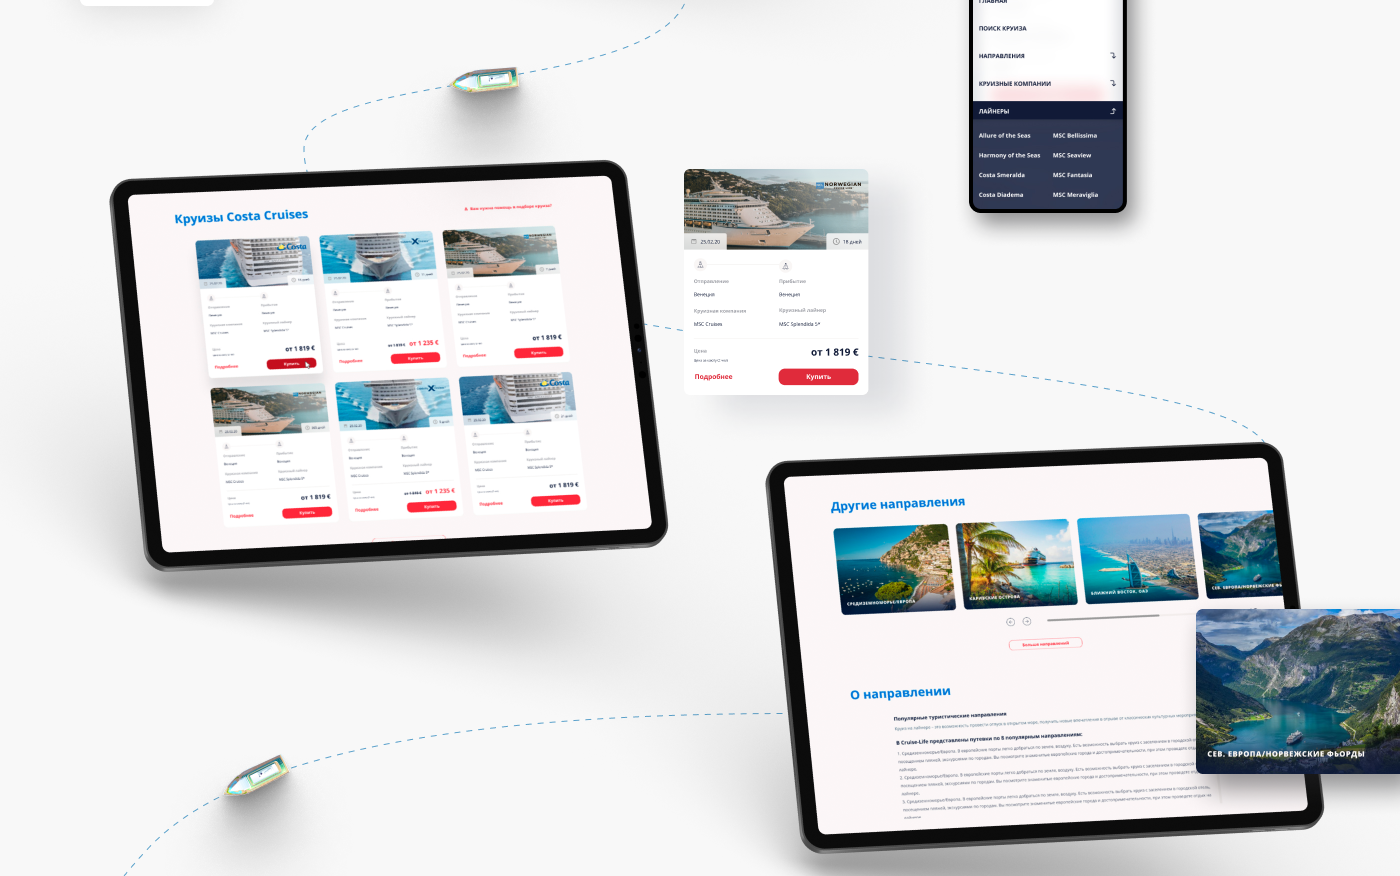 The design of the Home Page and Inner Pages of the project Cruise-Life